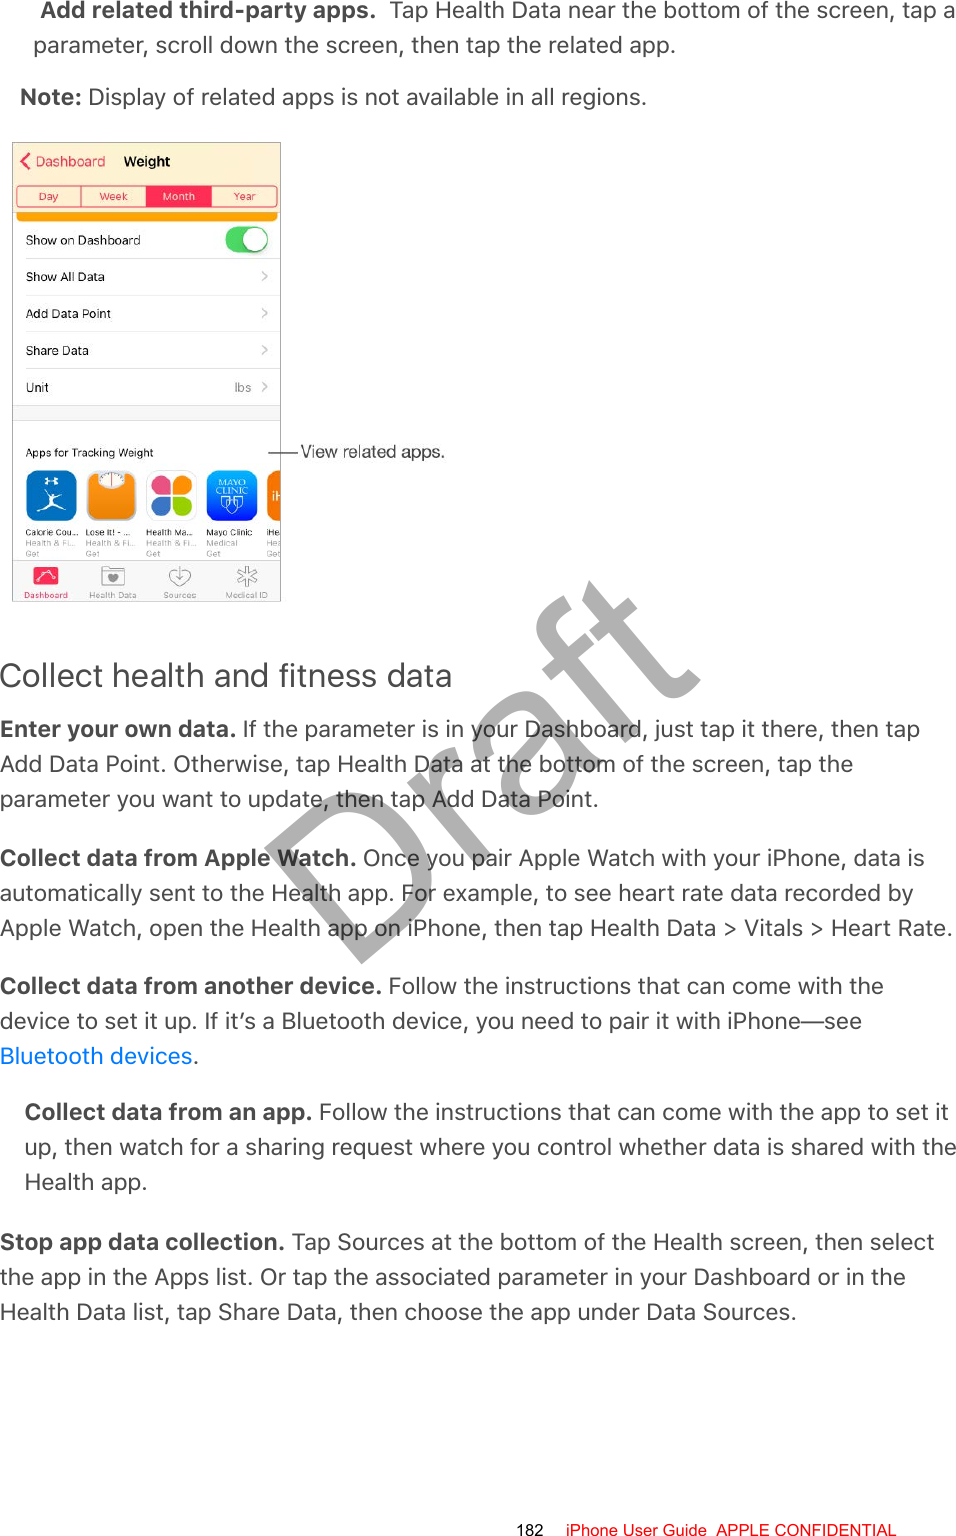 Add related third-party apps.  Tap Health Data near the bottom of the screen, tap aparameter, scroll down the screen, then tap the related app.Note: Display of related apps is not available in all regions.Collect health and fitness dataEnter your own data. If the parameter is in your Dashboard, just tap it there, then tapAdd Data Point. Otherwise, tap Health Data at the bottom of the screen, tap theparameter you want to update, then tap Add Data Point.Collect data from Apple Watch. Once you pair Apple Watch with your iPhone, data isautomatically sent to the Health app. For example, to see heart rate data recorded byApple Watch, open the Health app on iPhone, then tap Health Data &gt; Vitals &gt; Heart Rate.Collect data from another device. Follow the instructions that can come with thedevice to set it up. If it’s a Bluetooth device, you need to pair it with iPhone—see.Collect data from an app. Follow the instructions that can come with the app to set itup, then watch for a sharing request where you control whether data is shared with theHealth app.Stop app data collection. Tap Sources at the bottom of the Health screen, then selectthe app in the Apps list. Or tap the associated parameter in your Dashboard or in theHealth Data list, tap Share Data, then choose the app under Data Sources.Bluetooth devices182 iPhone User Guide  APPLE CONFIDENTIALDraft